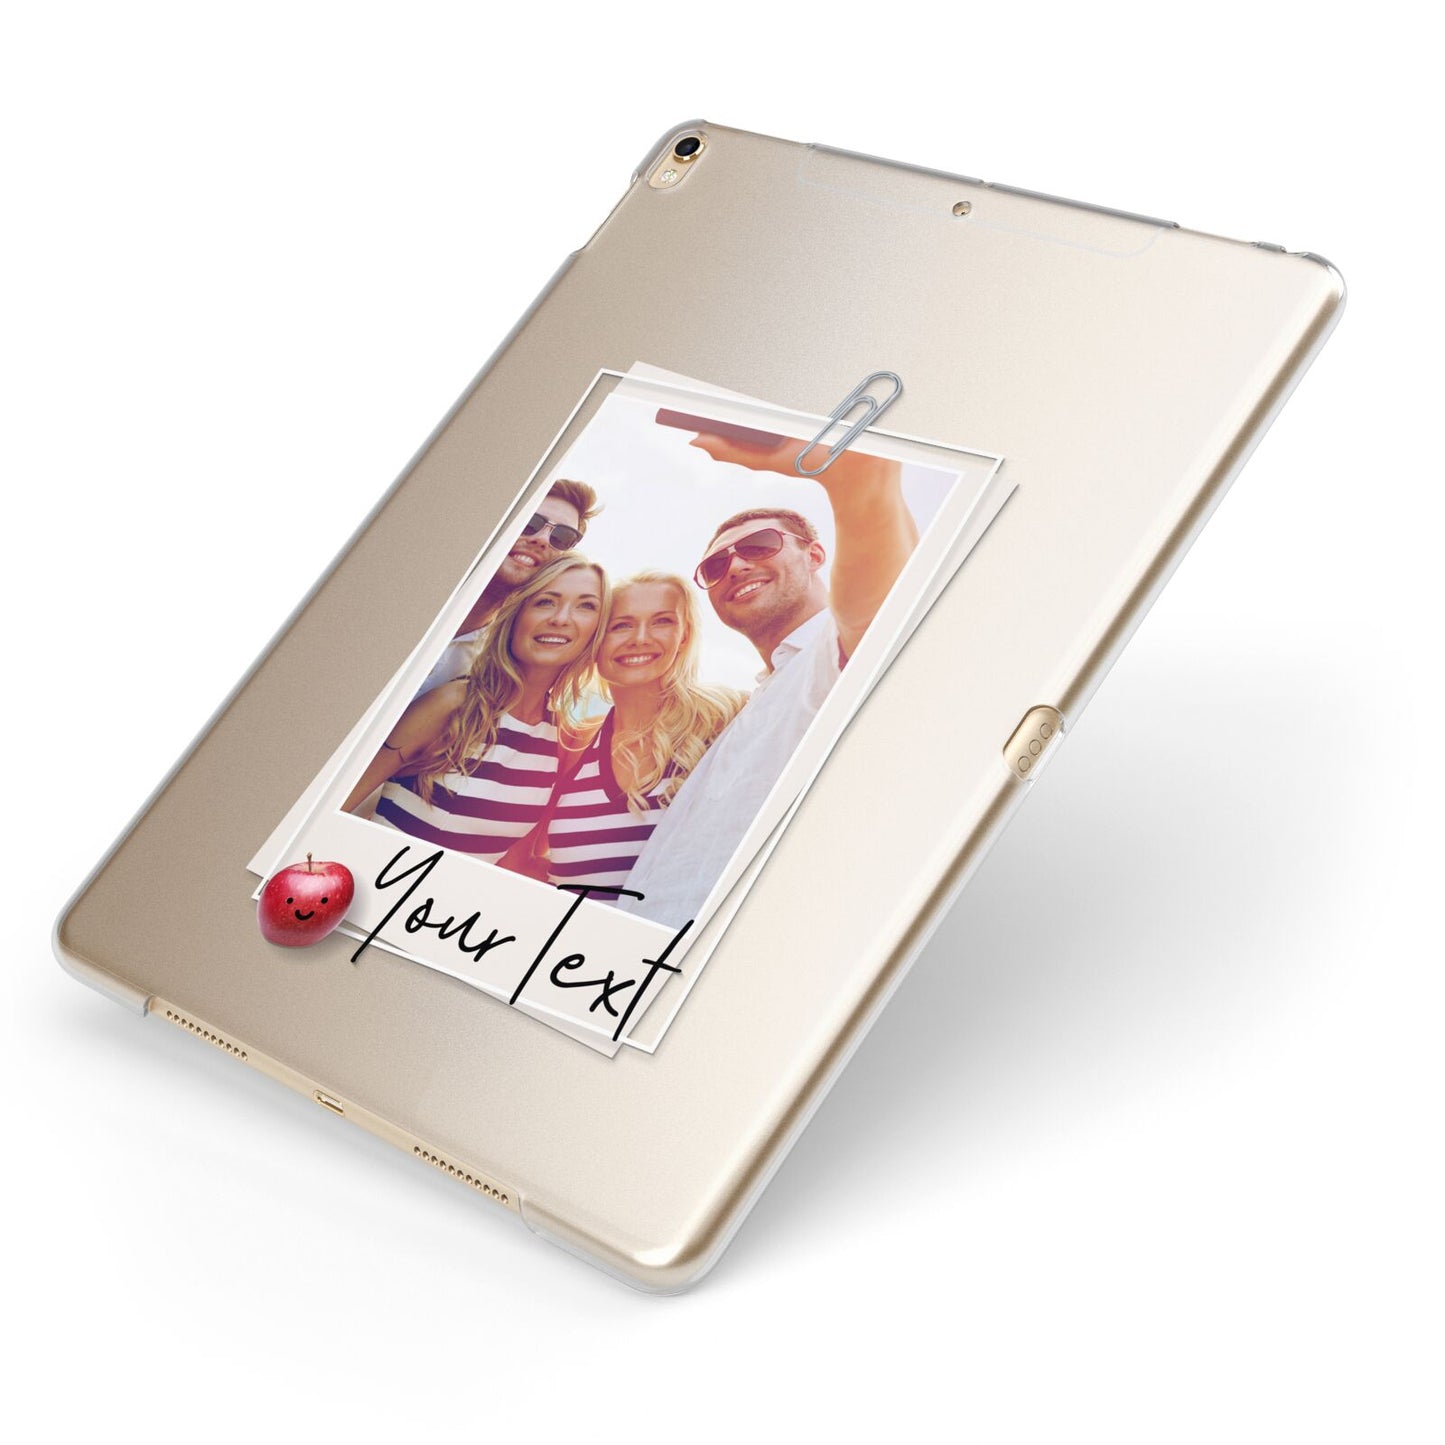 Photograph and Name Apple iPad Case on Gold iPad Side View